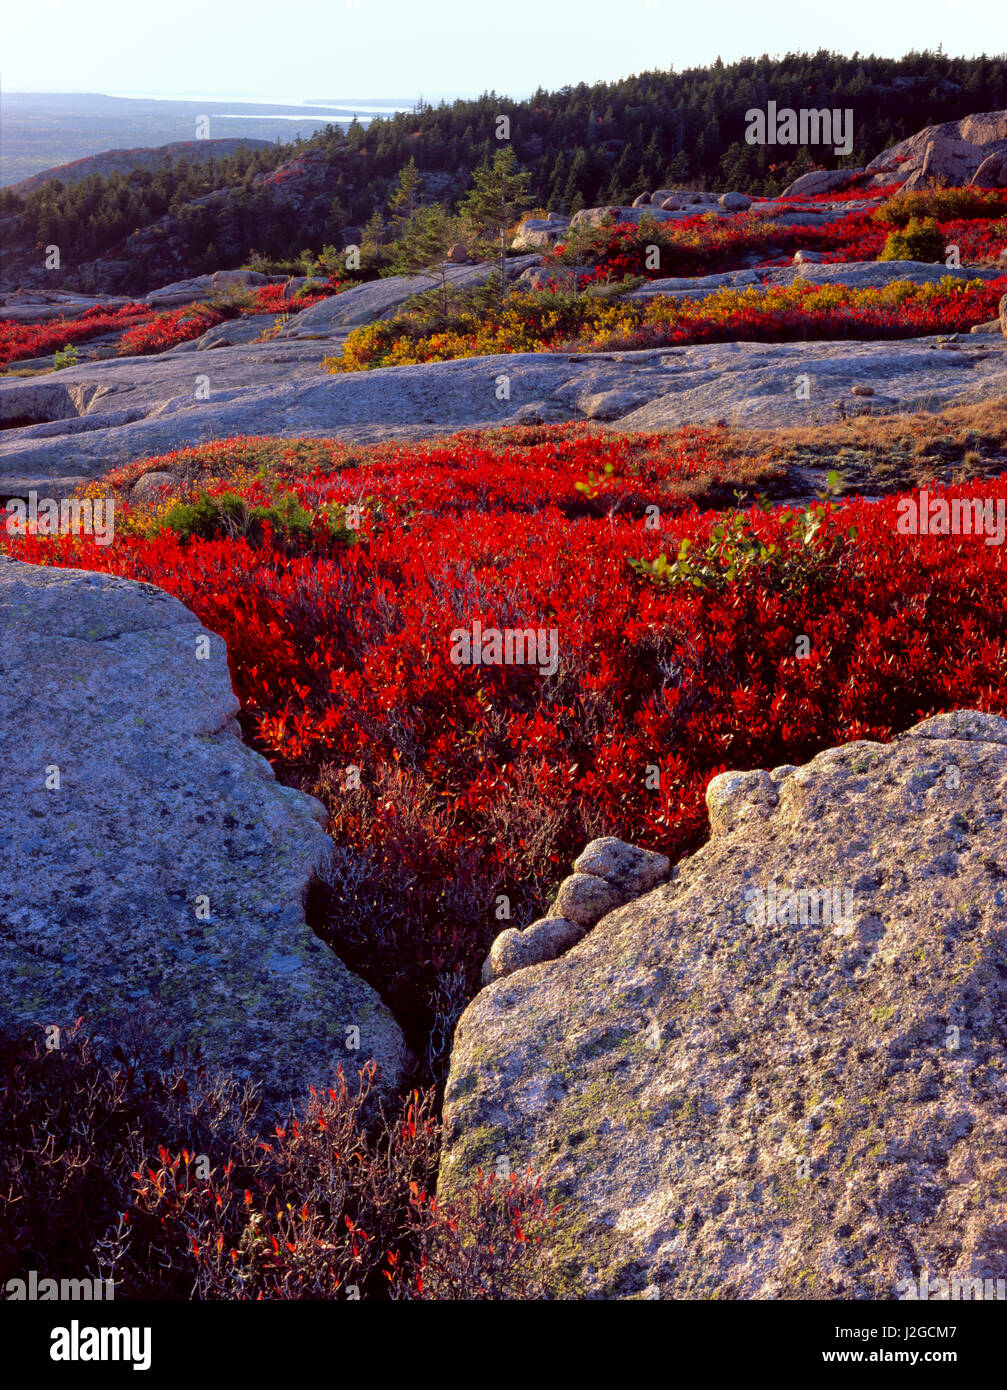 Acadia National Park, Maine. USA. Granite bedrock and scarlet foliage of black huckleberry (Gaylussacia baccata) in autumn. Penobscot Mountain. Mt. Desert Island. (Large format sizes available) Stock Photo